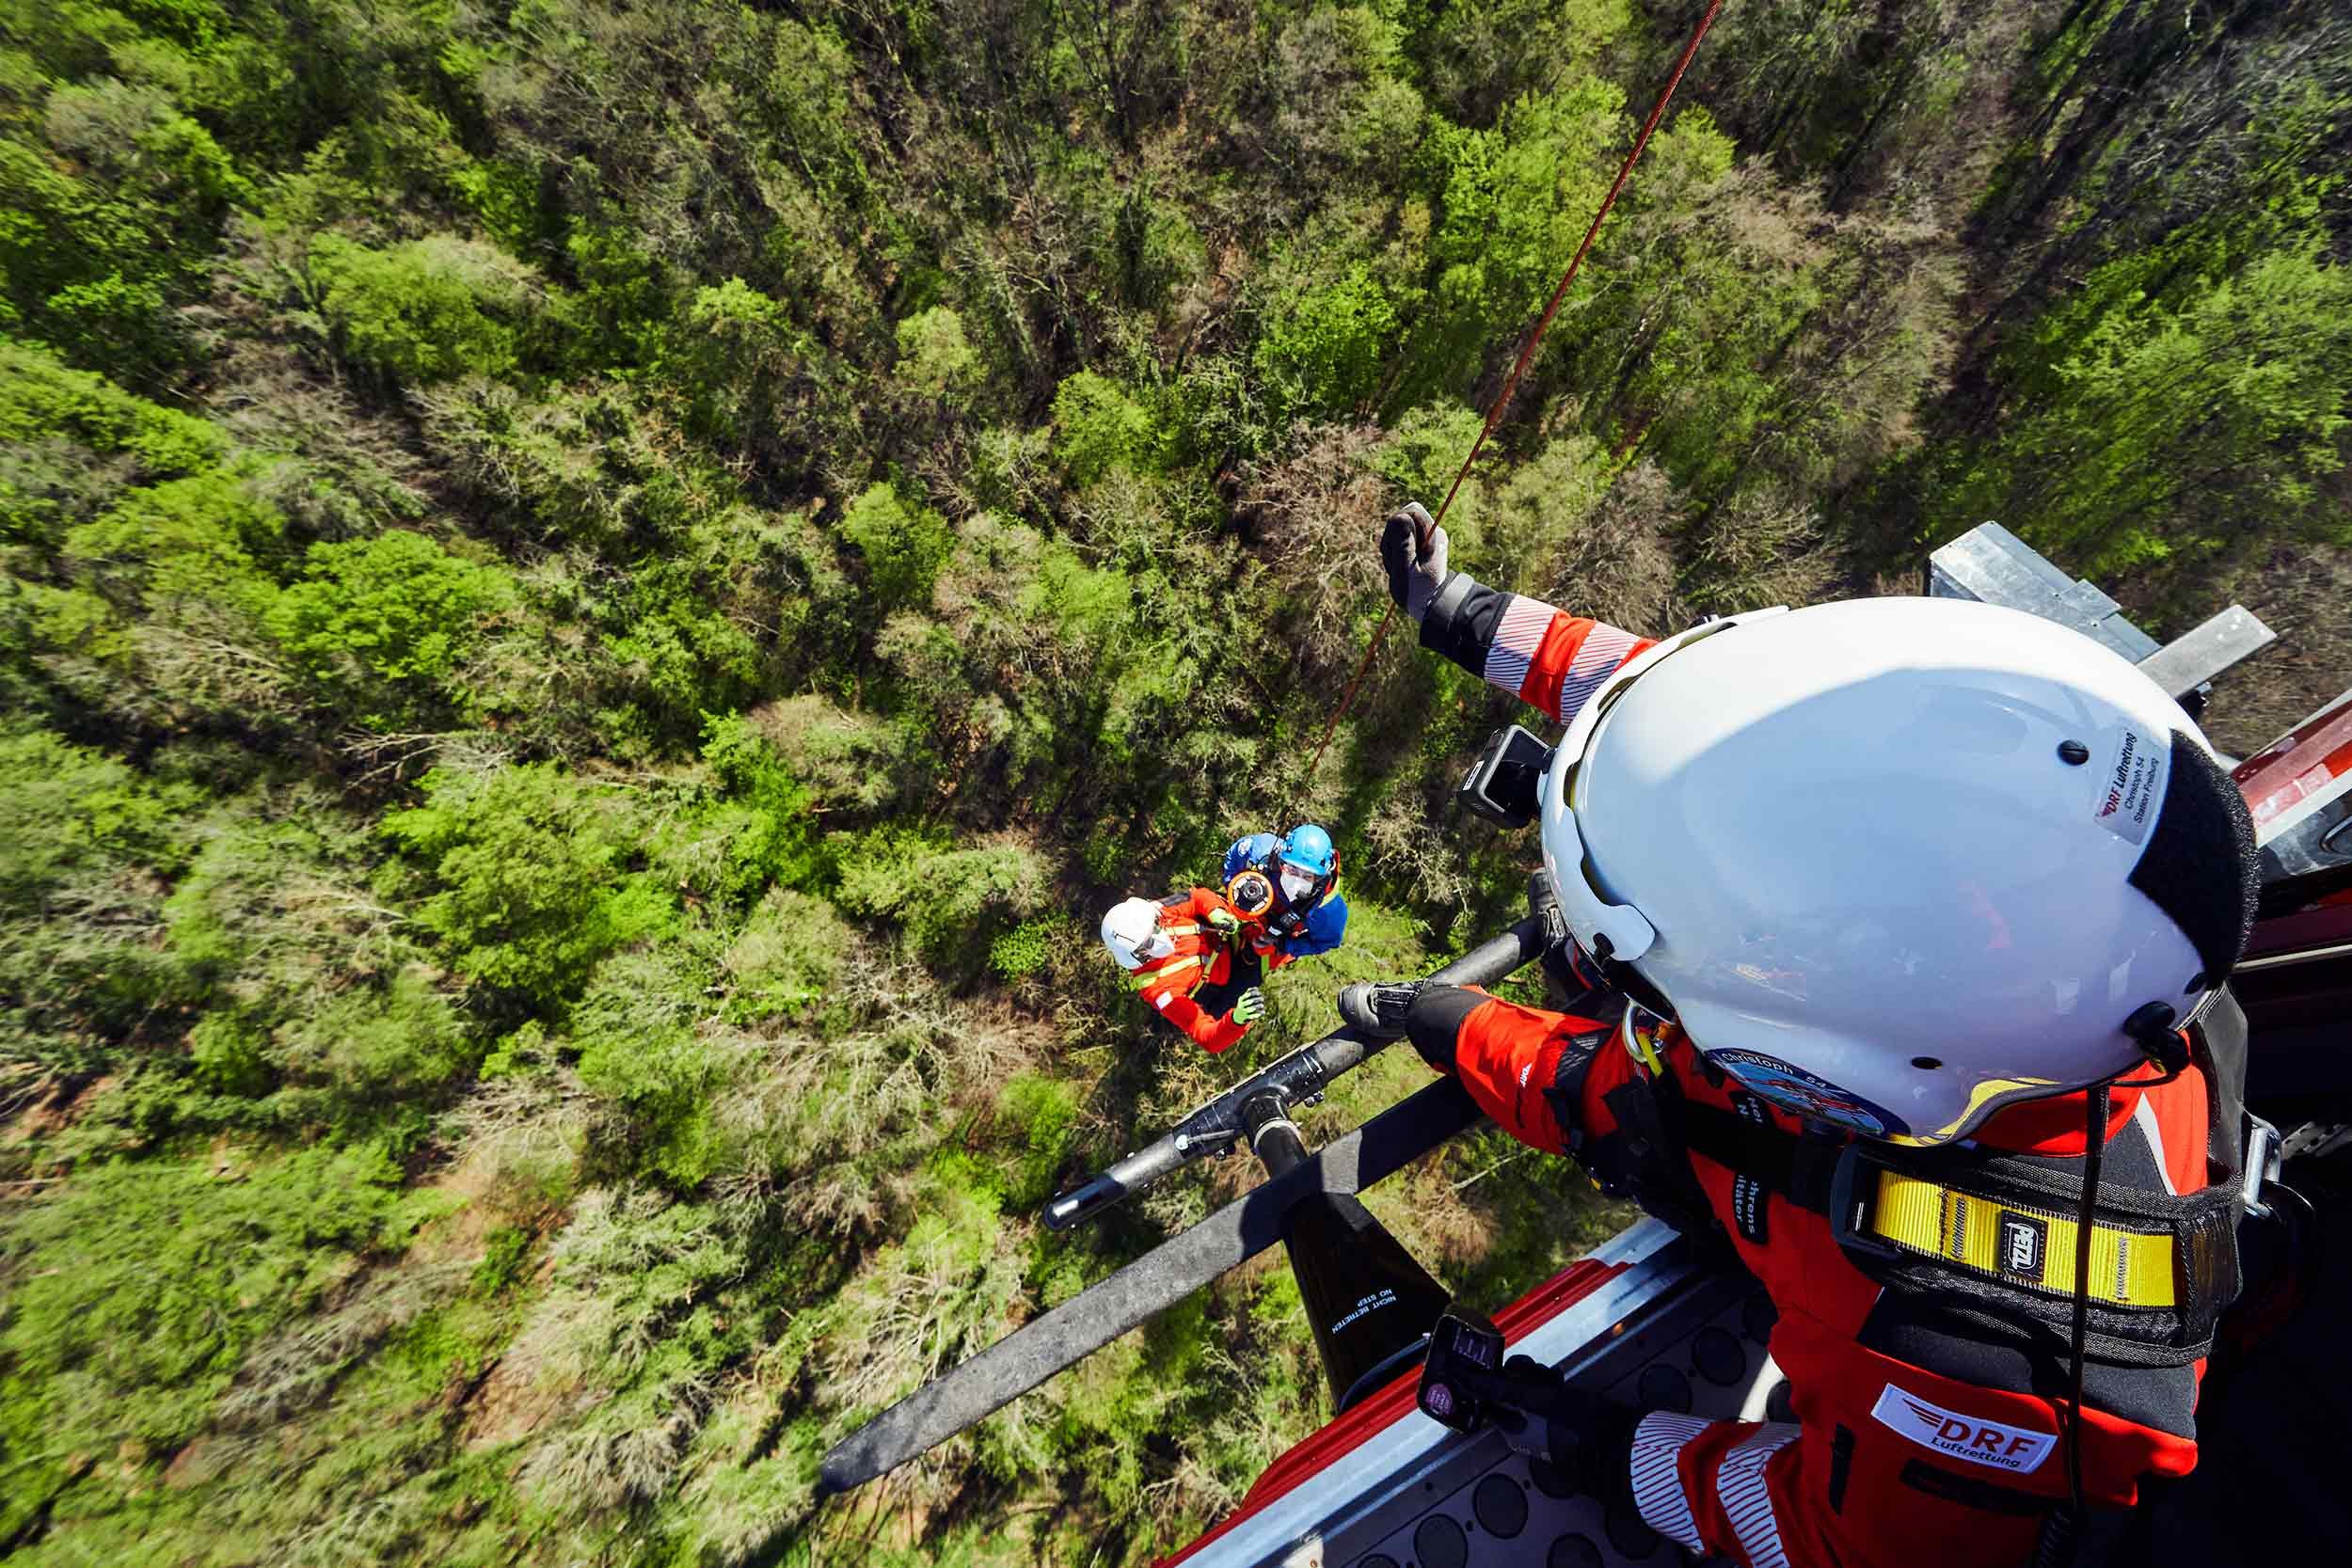 View from the open side door of the helicopter of two people being winched down with the rescue winch.